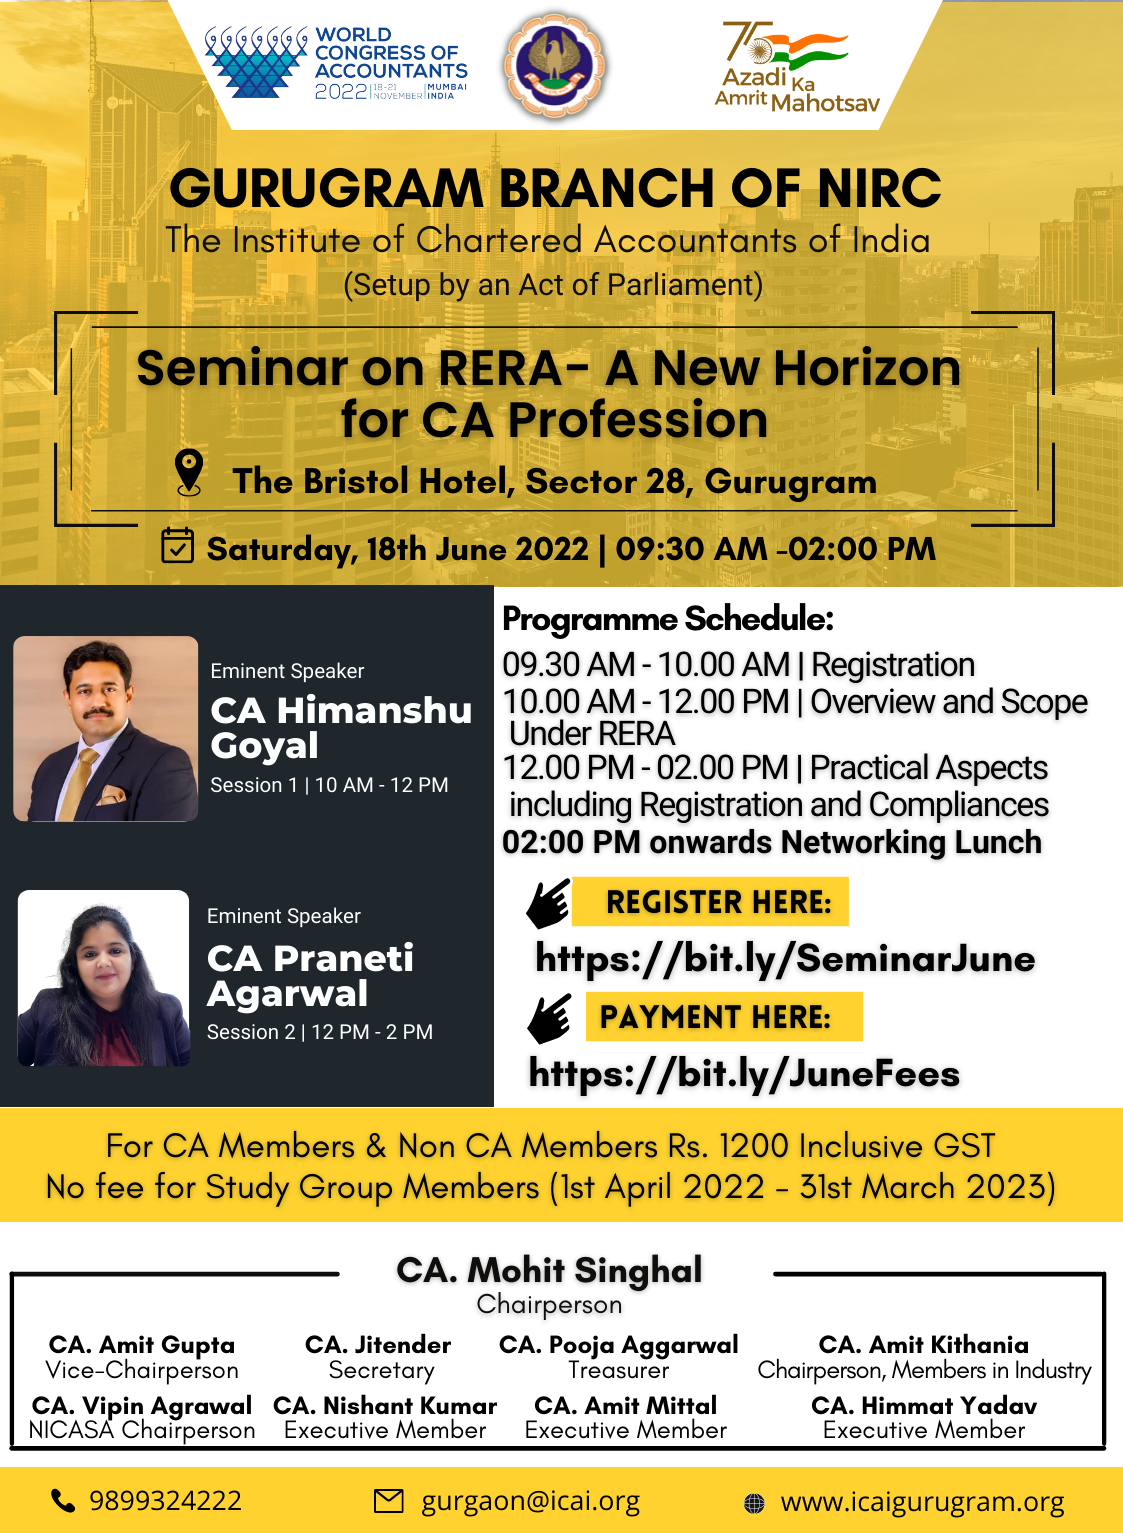 Physical Seminar on RERA- A New Horizon for CA Profession